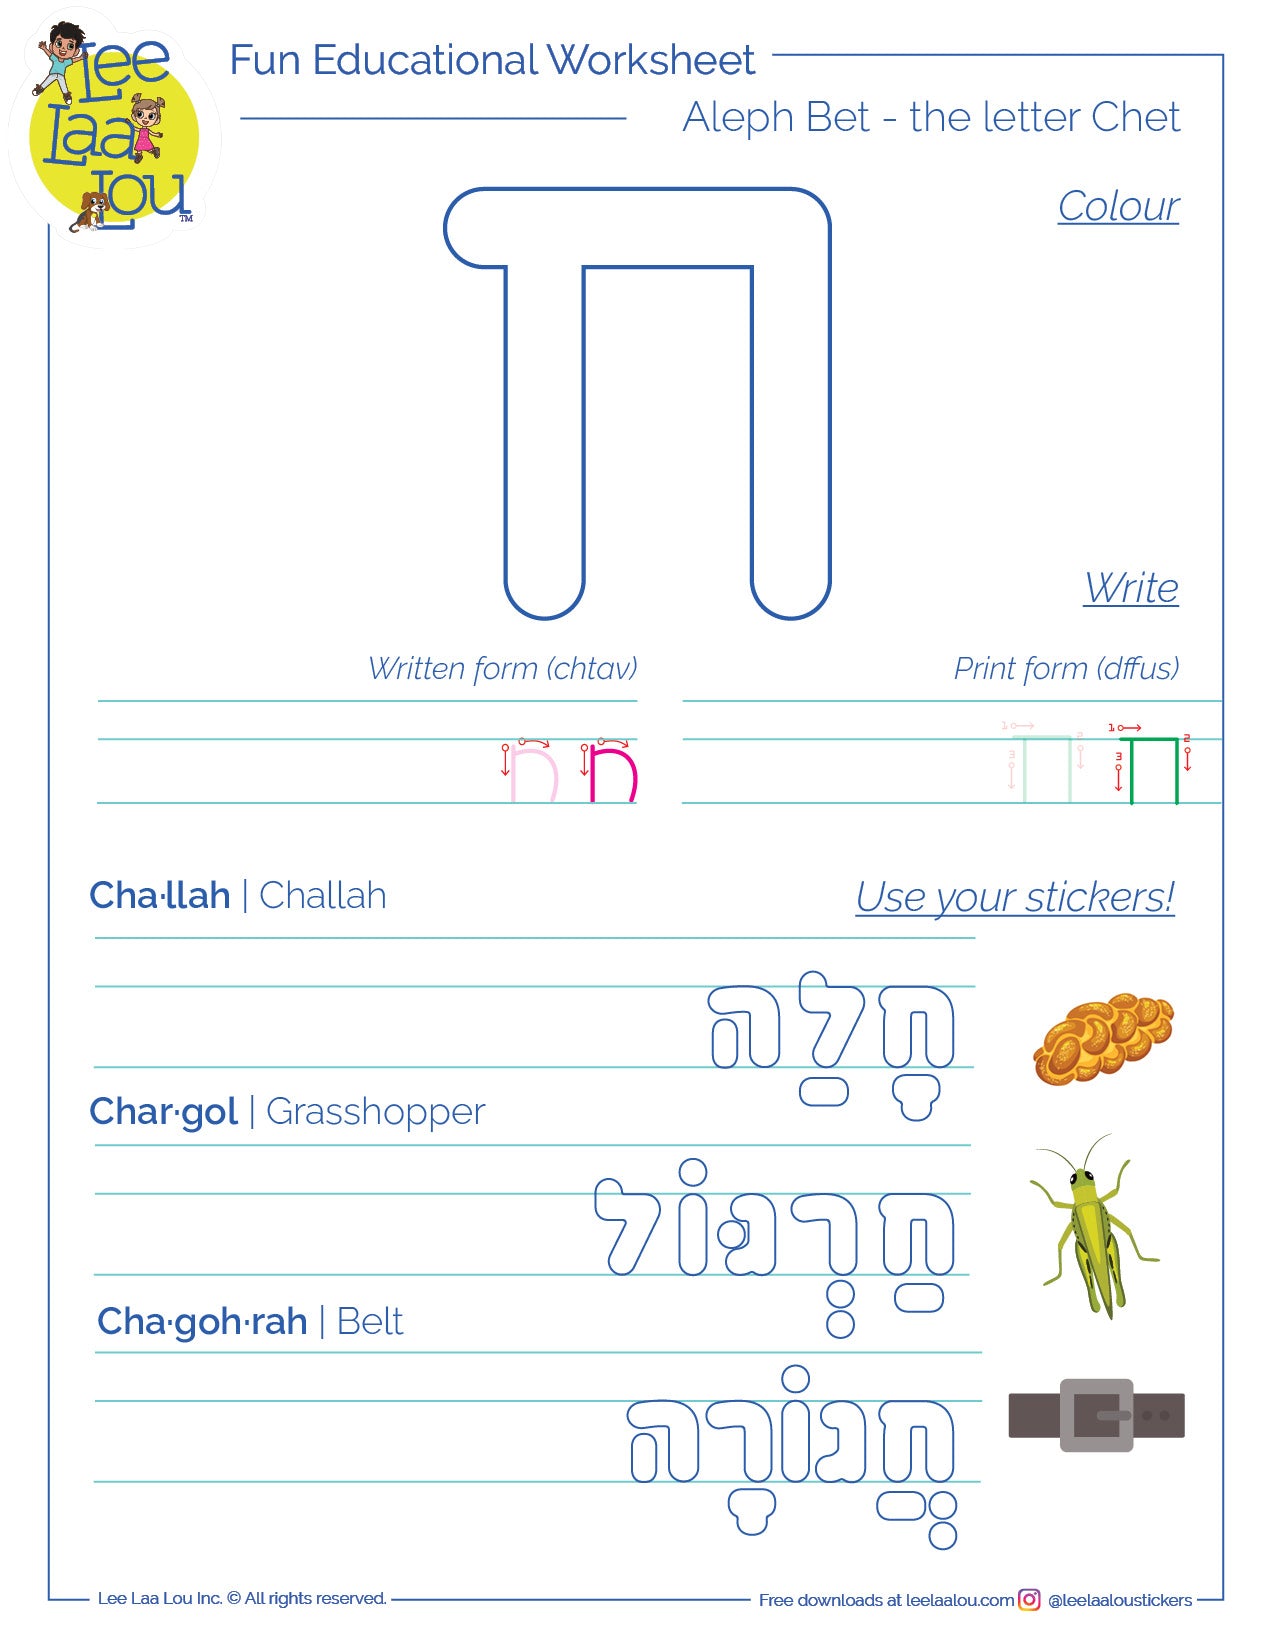 The eighth letter of the Hebrew alphabet - chet - activity sheet - האות חית דף עבודה